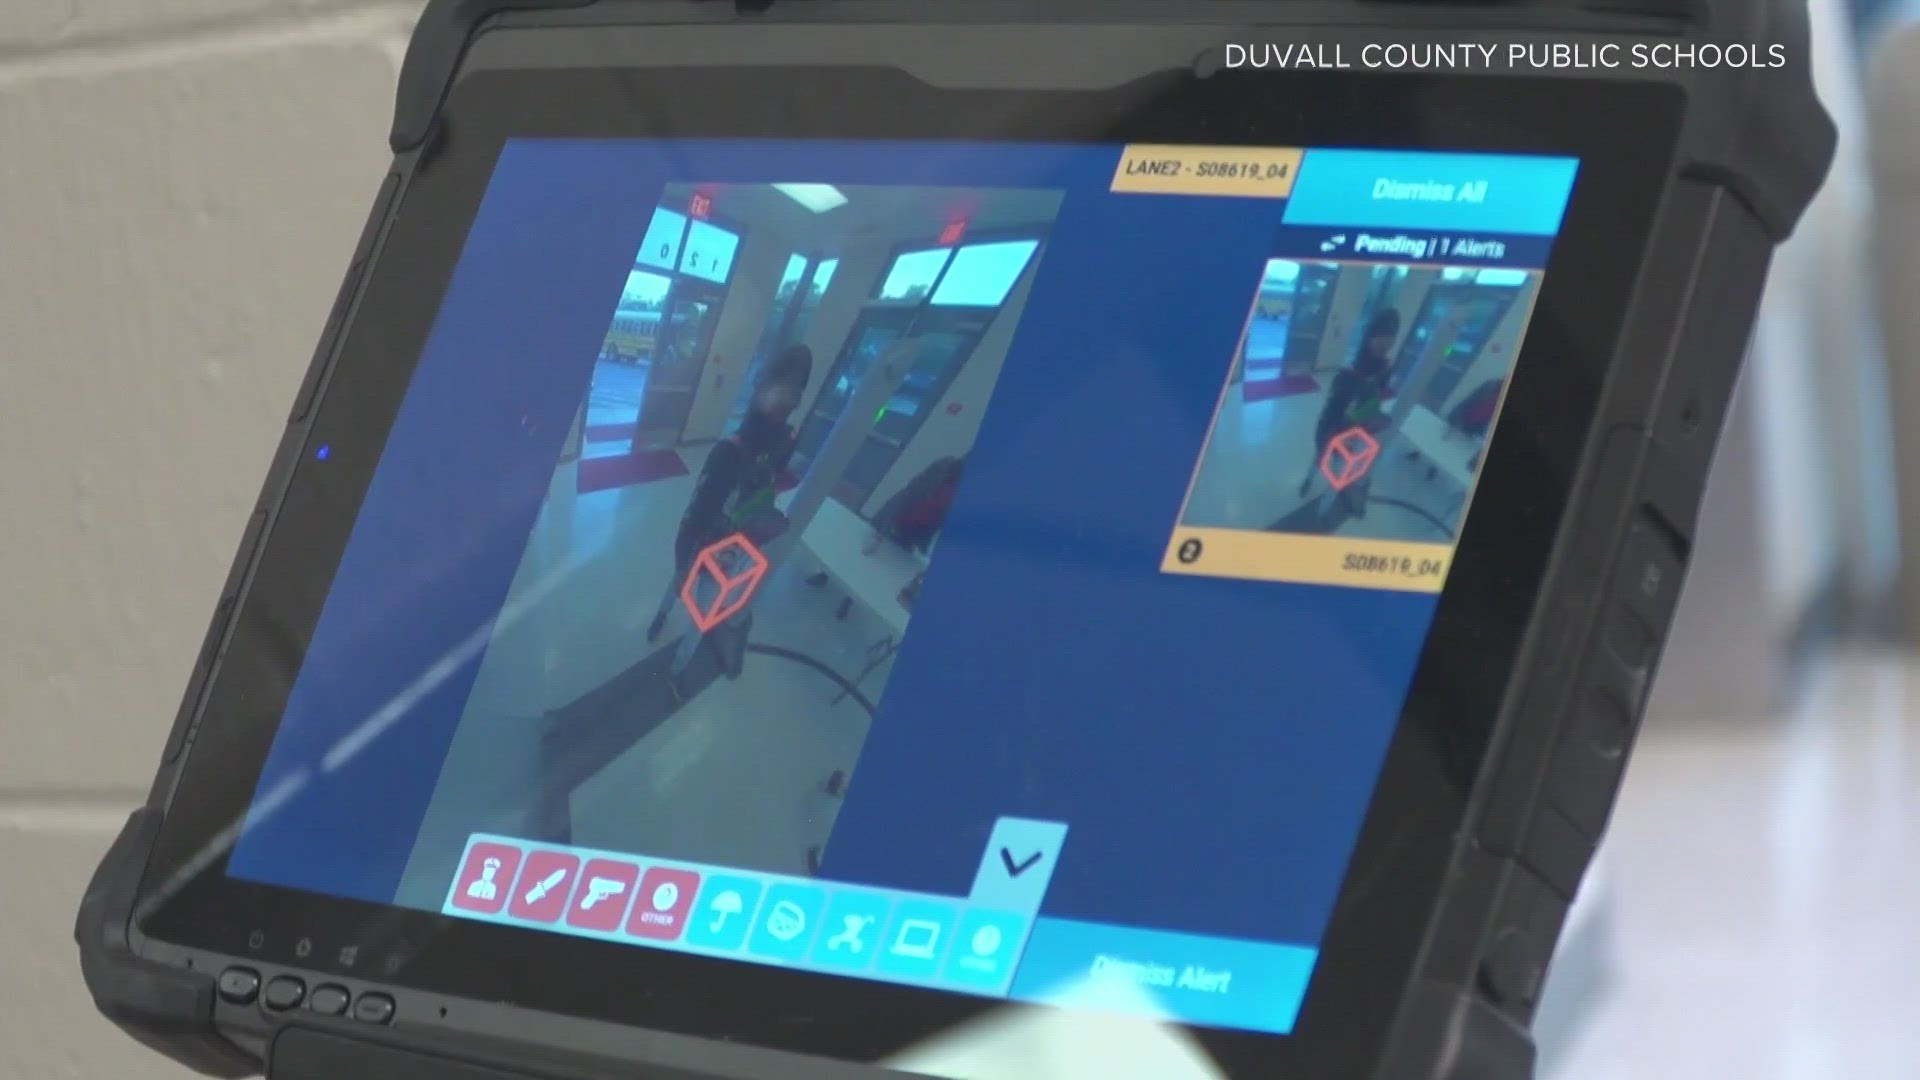 Several schools in Louisville will be using an AI weapon detection system.